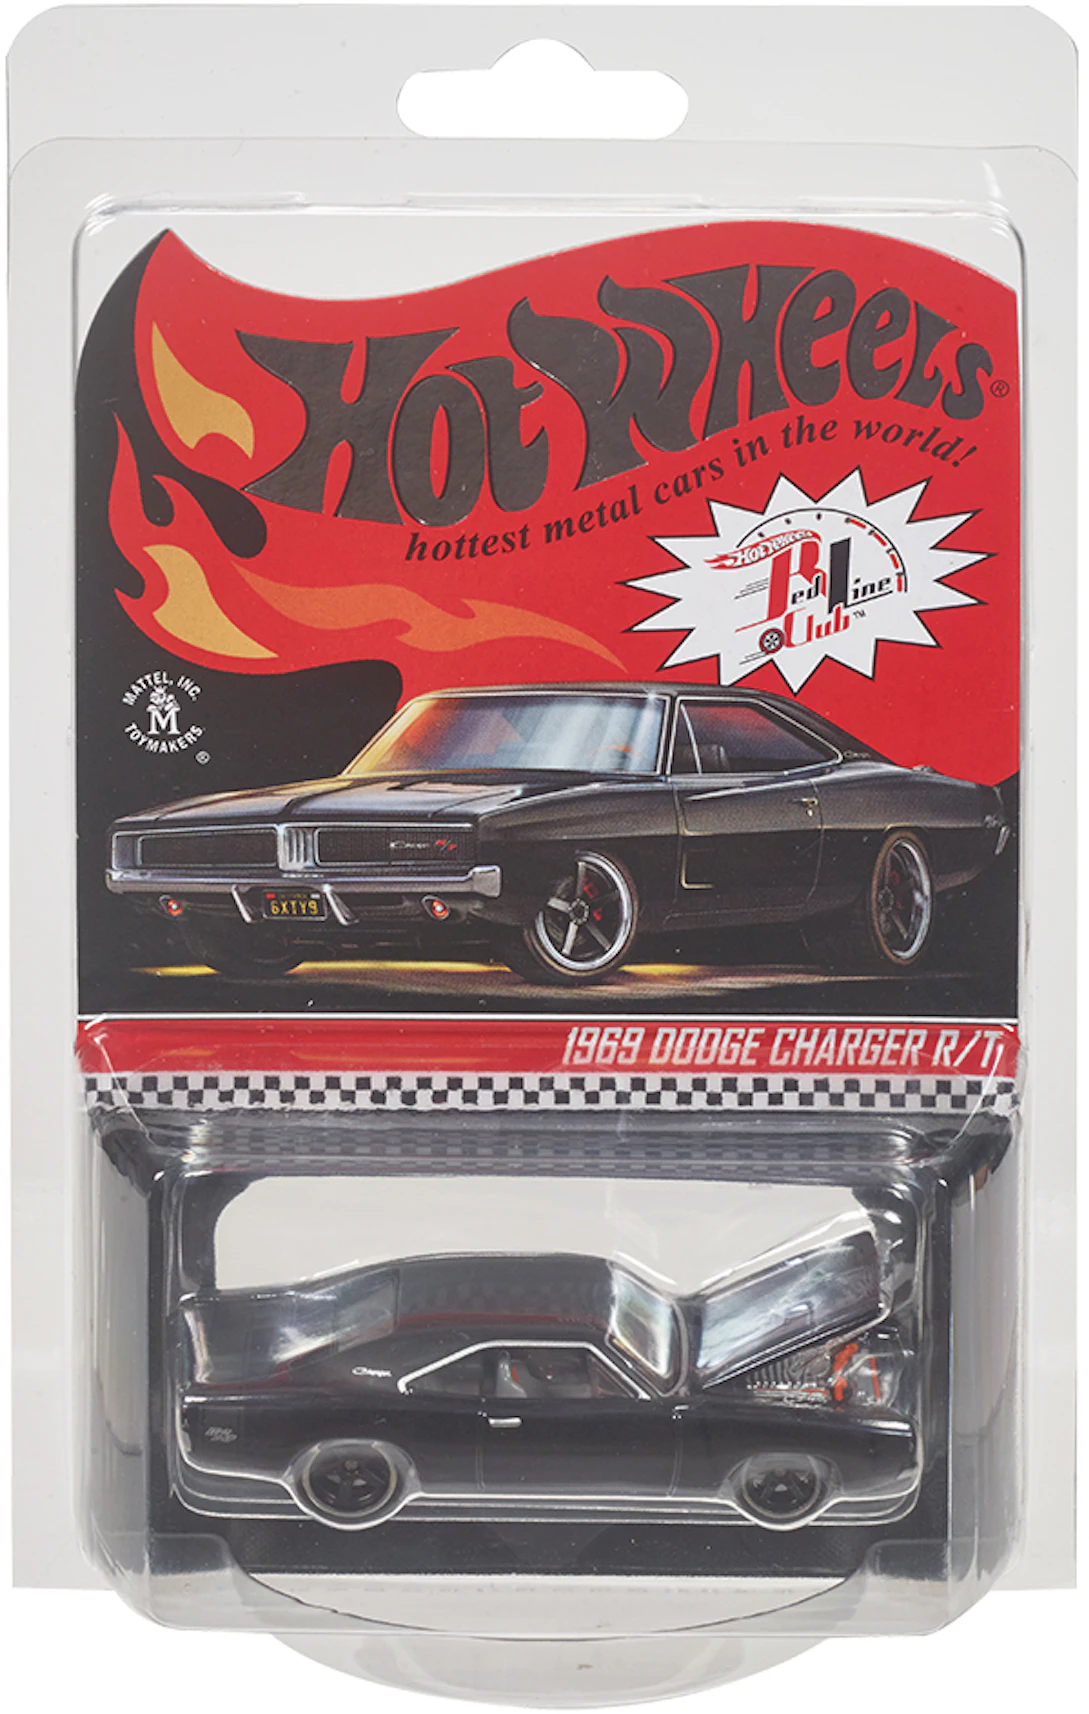 Hot Wheels 1969 Dodge Charger R/T Spectraflame Black - US